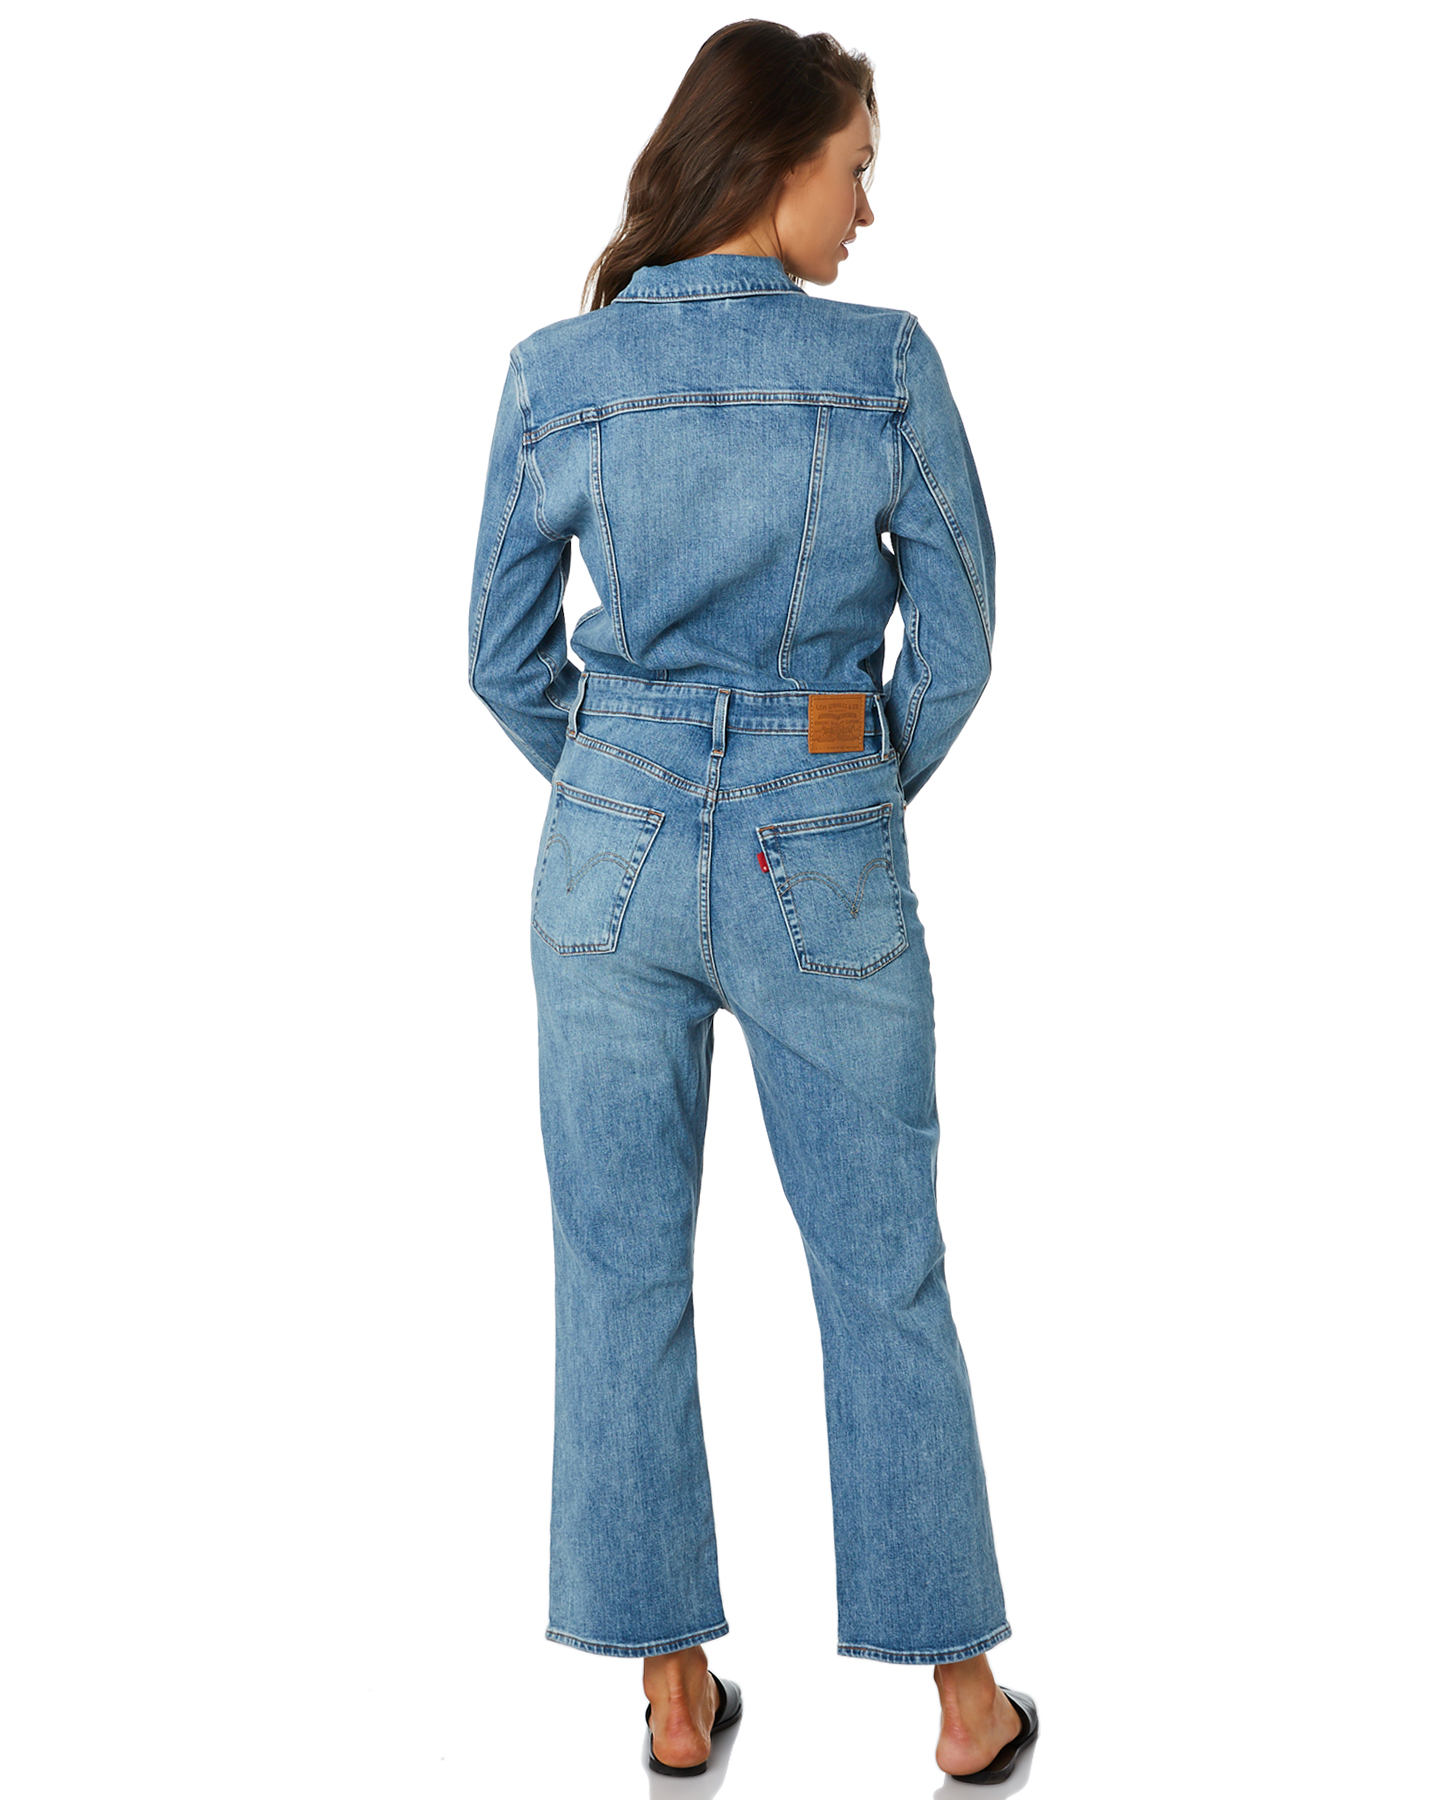 Levis Overalls Size Chart